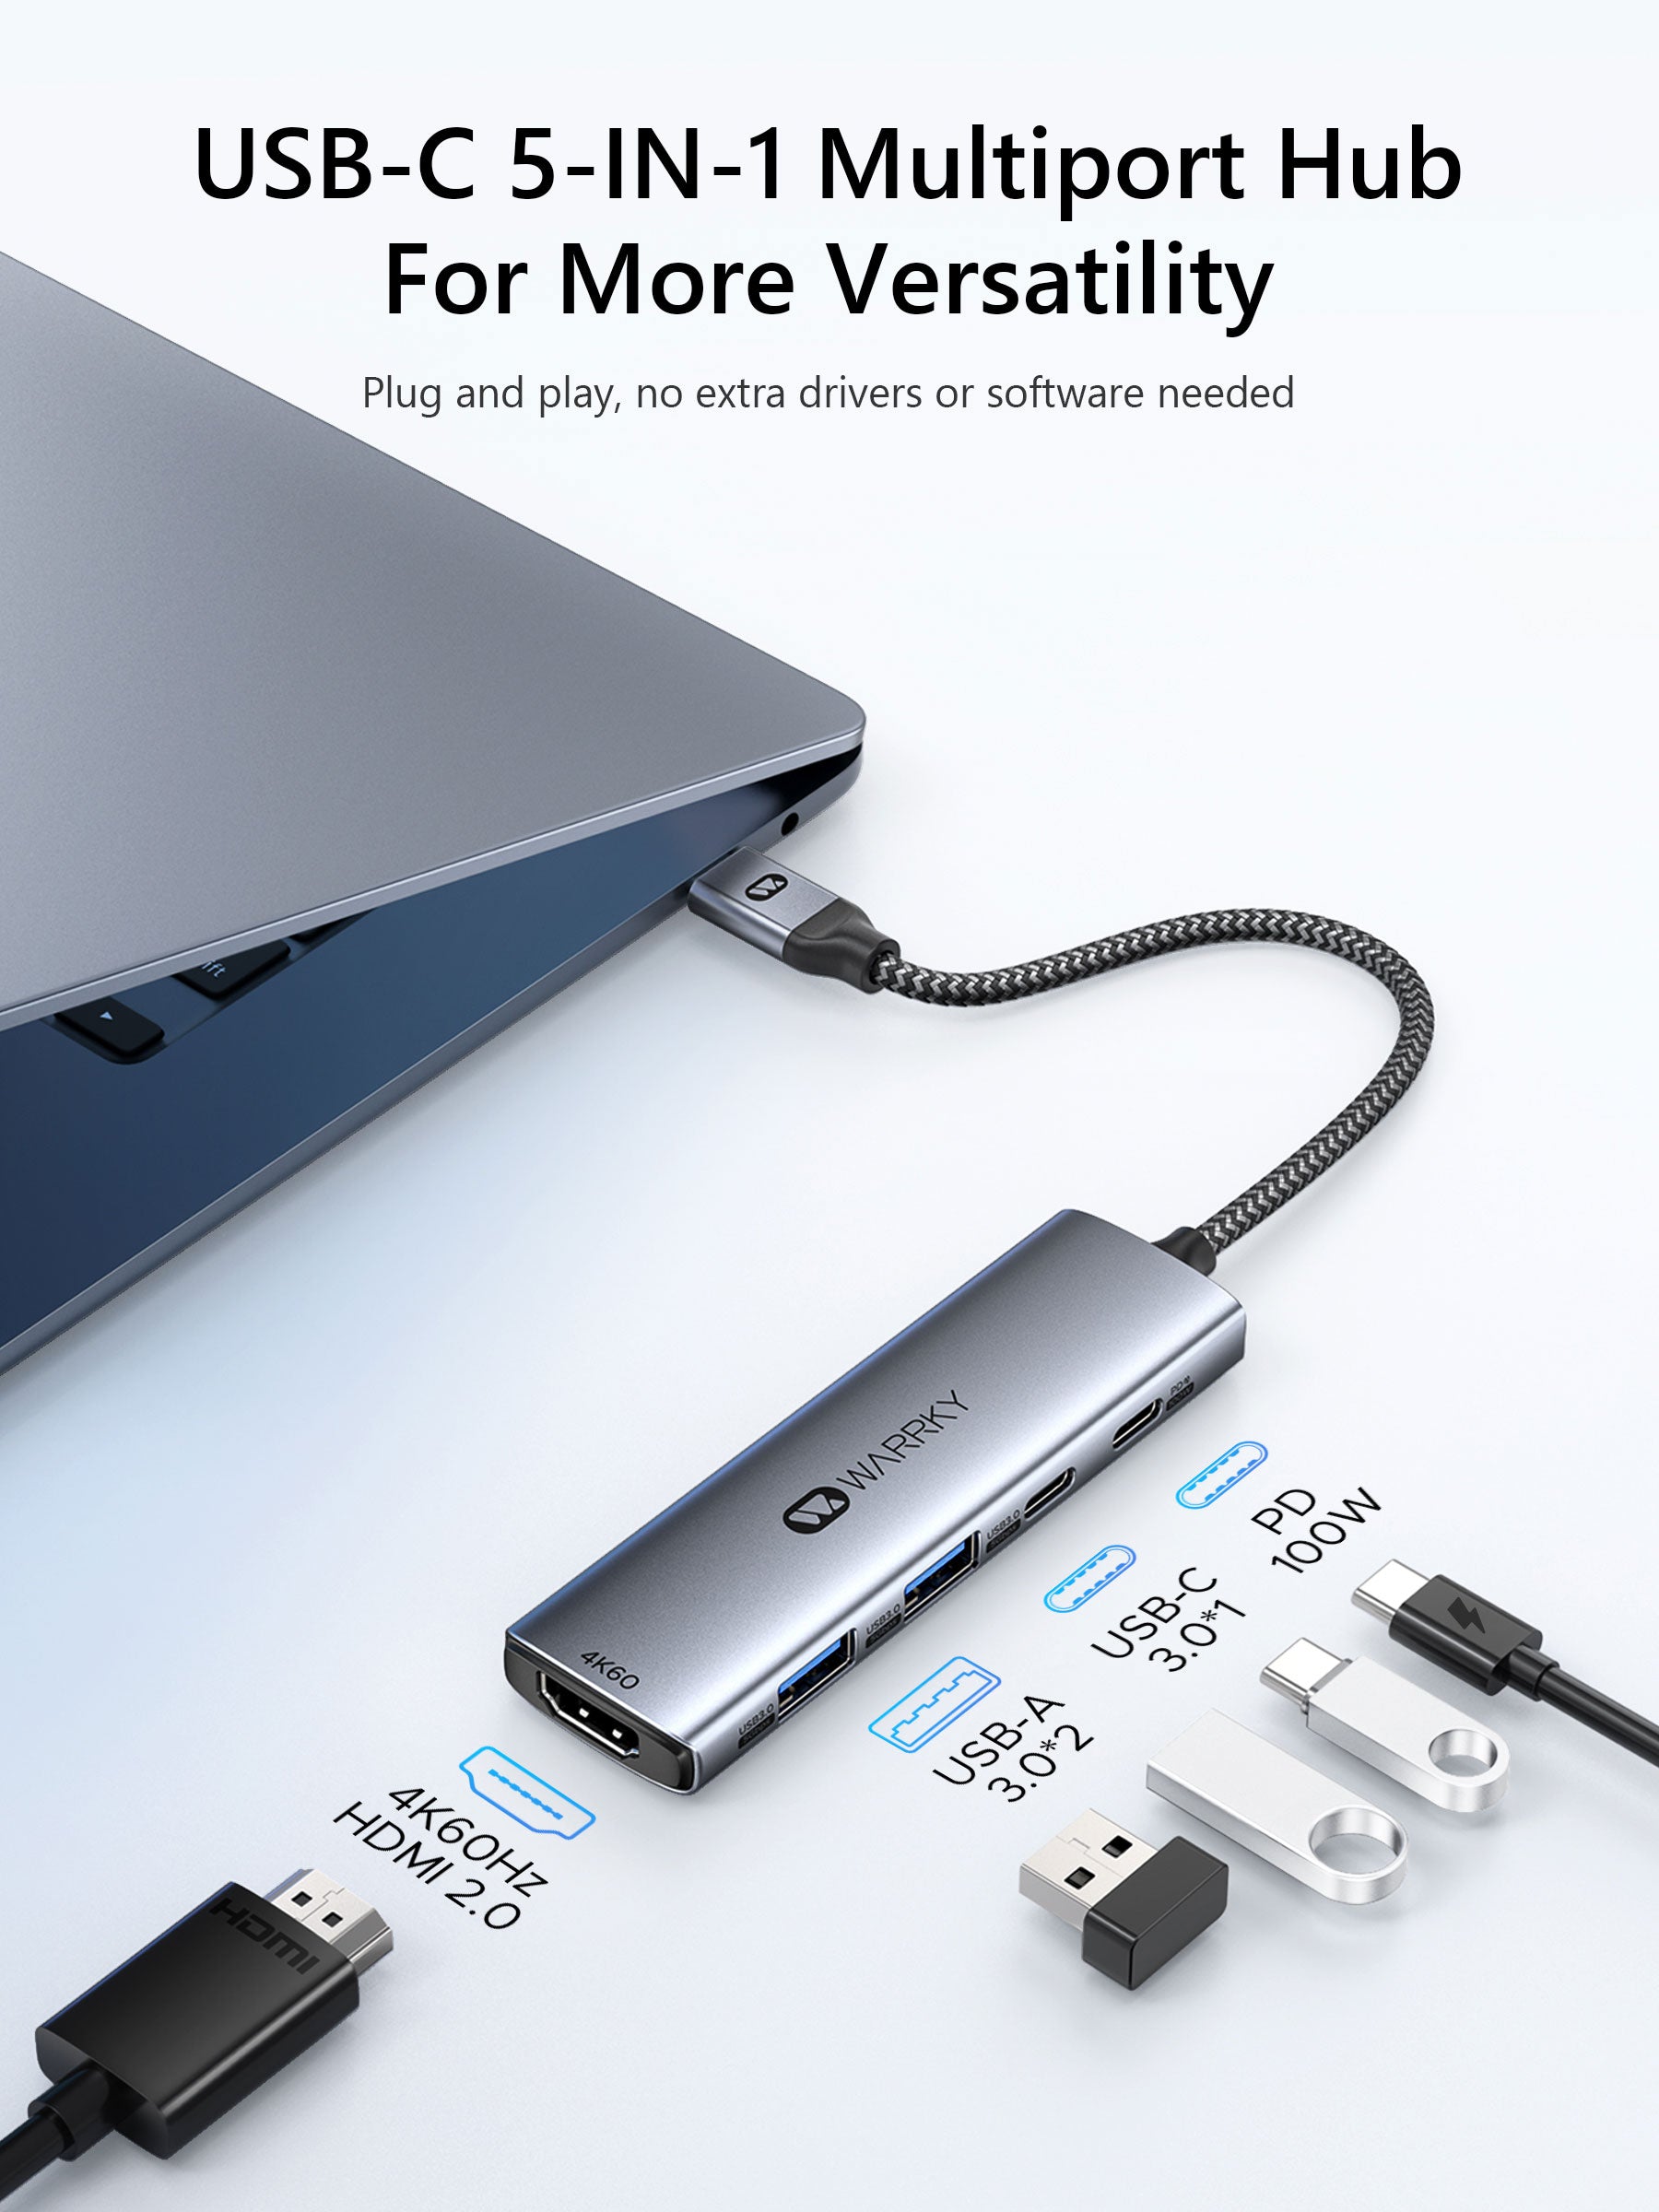 USB C 5-IN-1 Multiport Hub 0.5ft Silver Gray